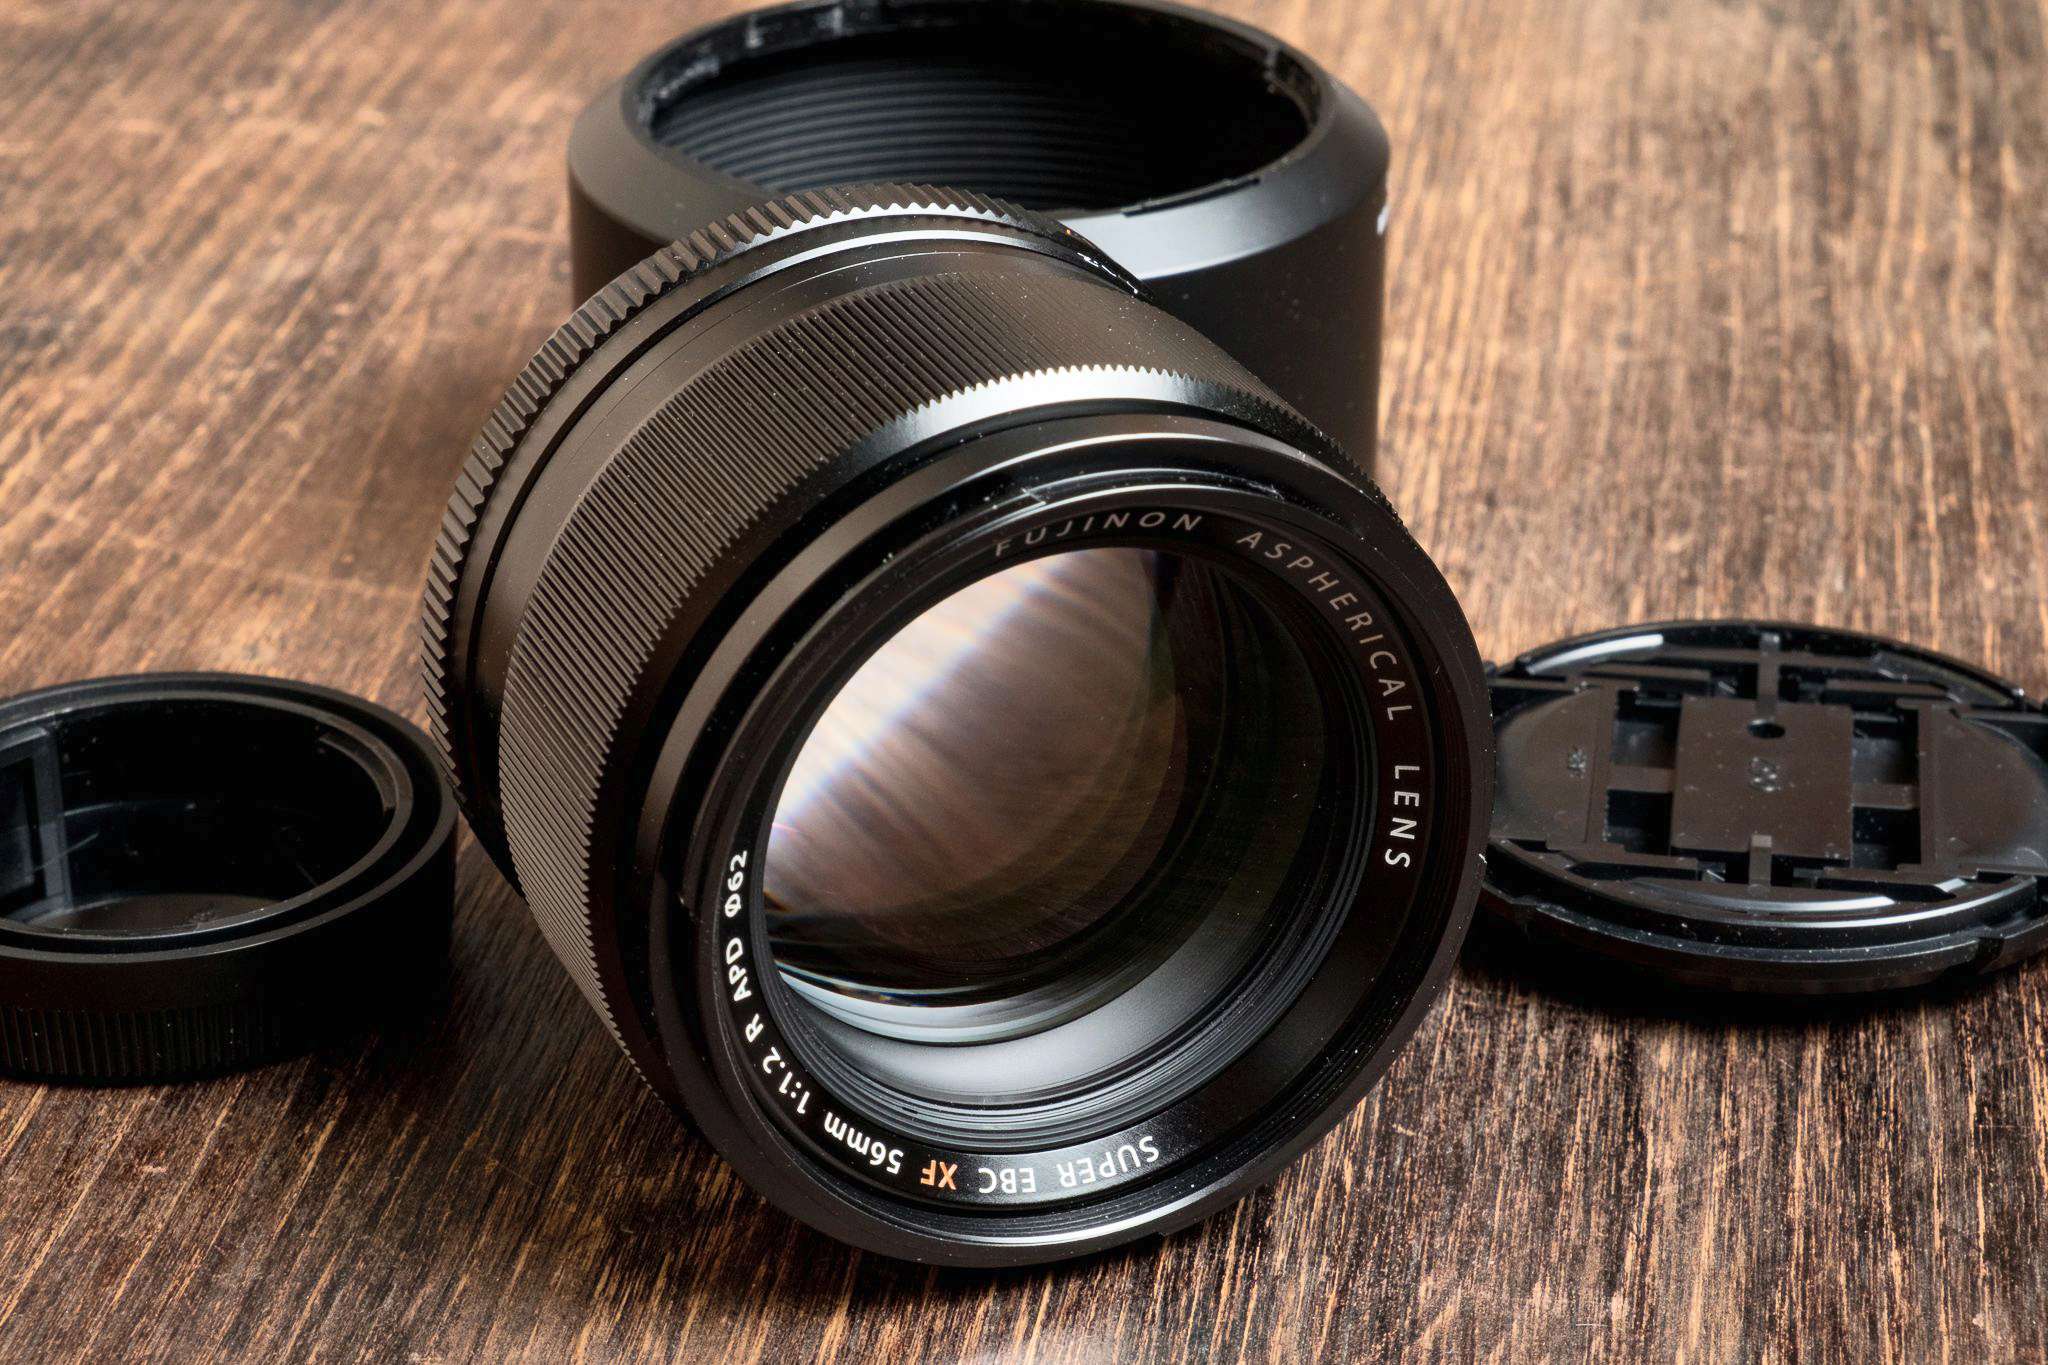 Fujifilm XF 56mm f/1.2 R: Excellent portrait lens for the X-series.